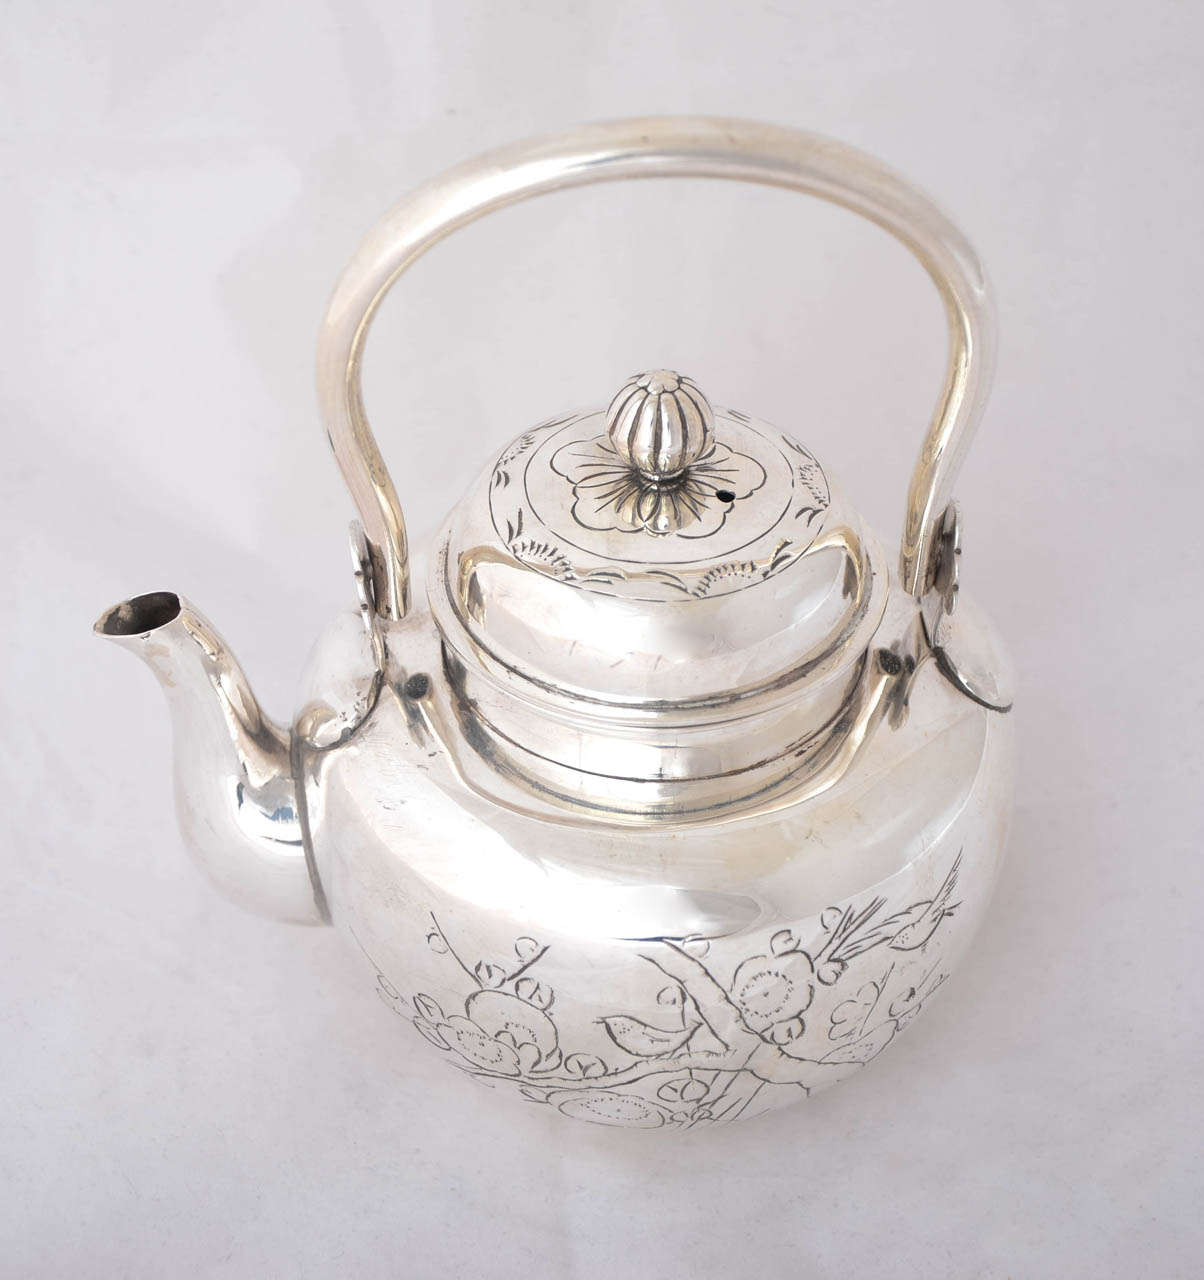 This small Meiji period kettle is a delightful example of Japanese silver. It is 15.5 cms to the top of the handle and weighs 270gms.